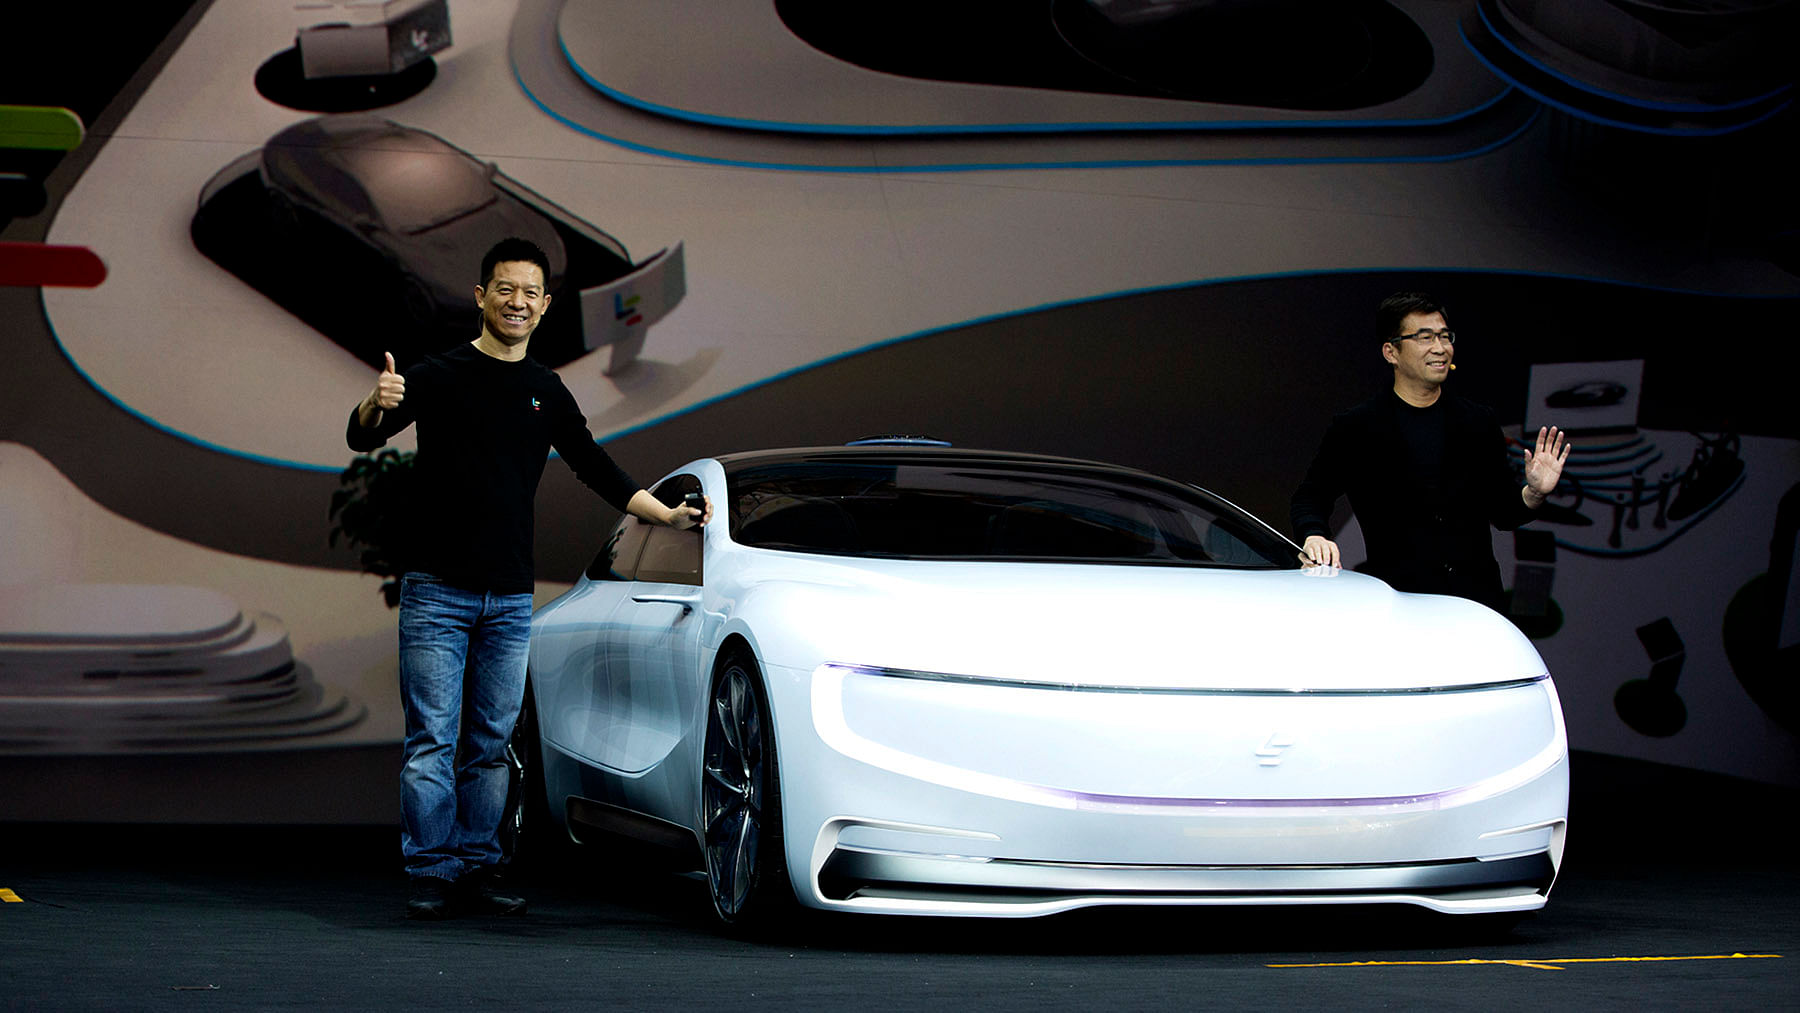 LeEco Super Car will be a D-Level electric car to rival Tesla’s Model 3. (Photo Courtesy: LeEco)